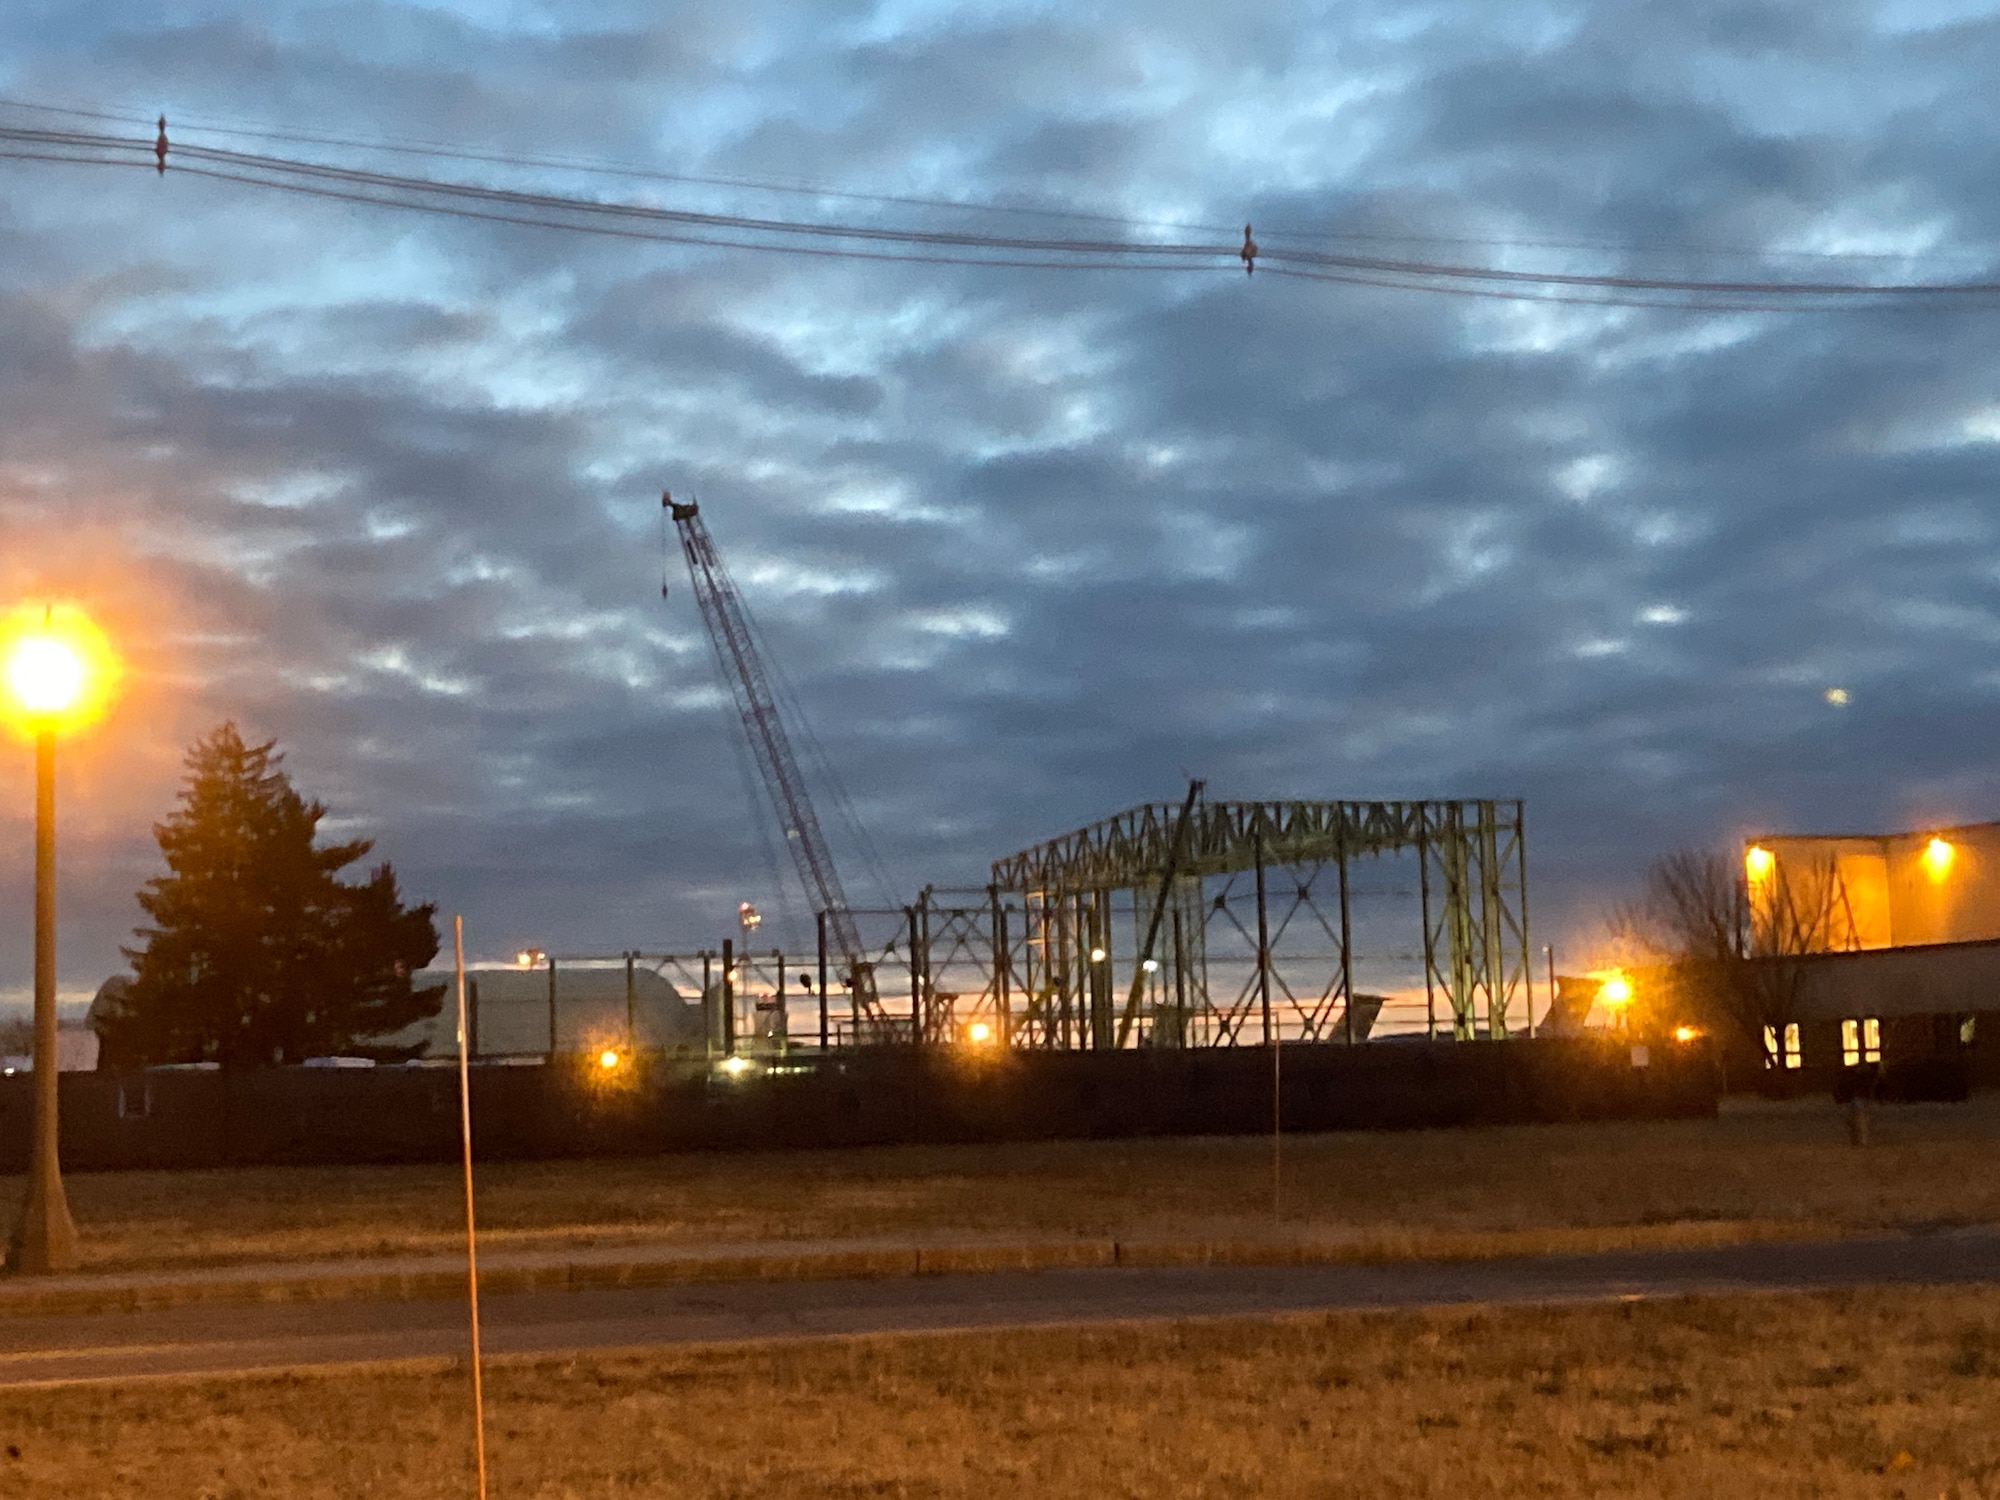 New super hangar rises from the sands of the Pioneer Valley